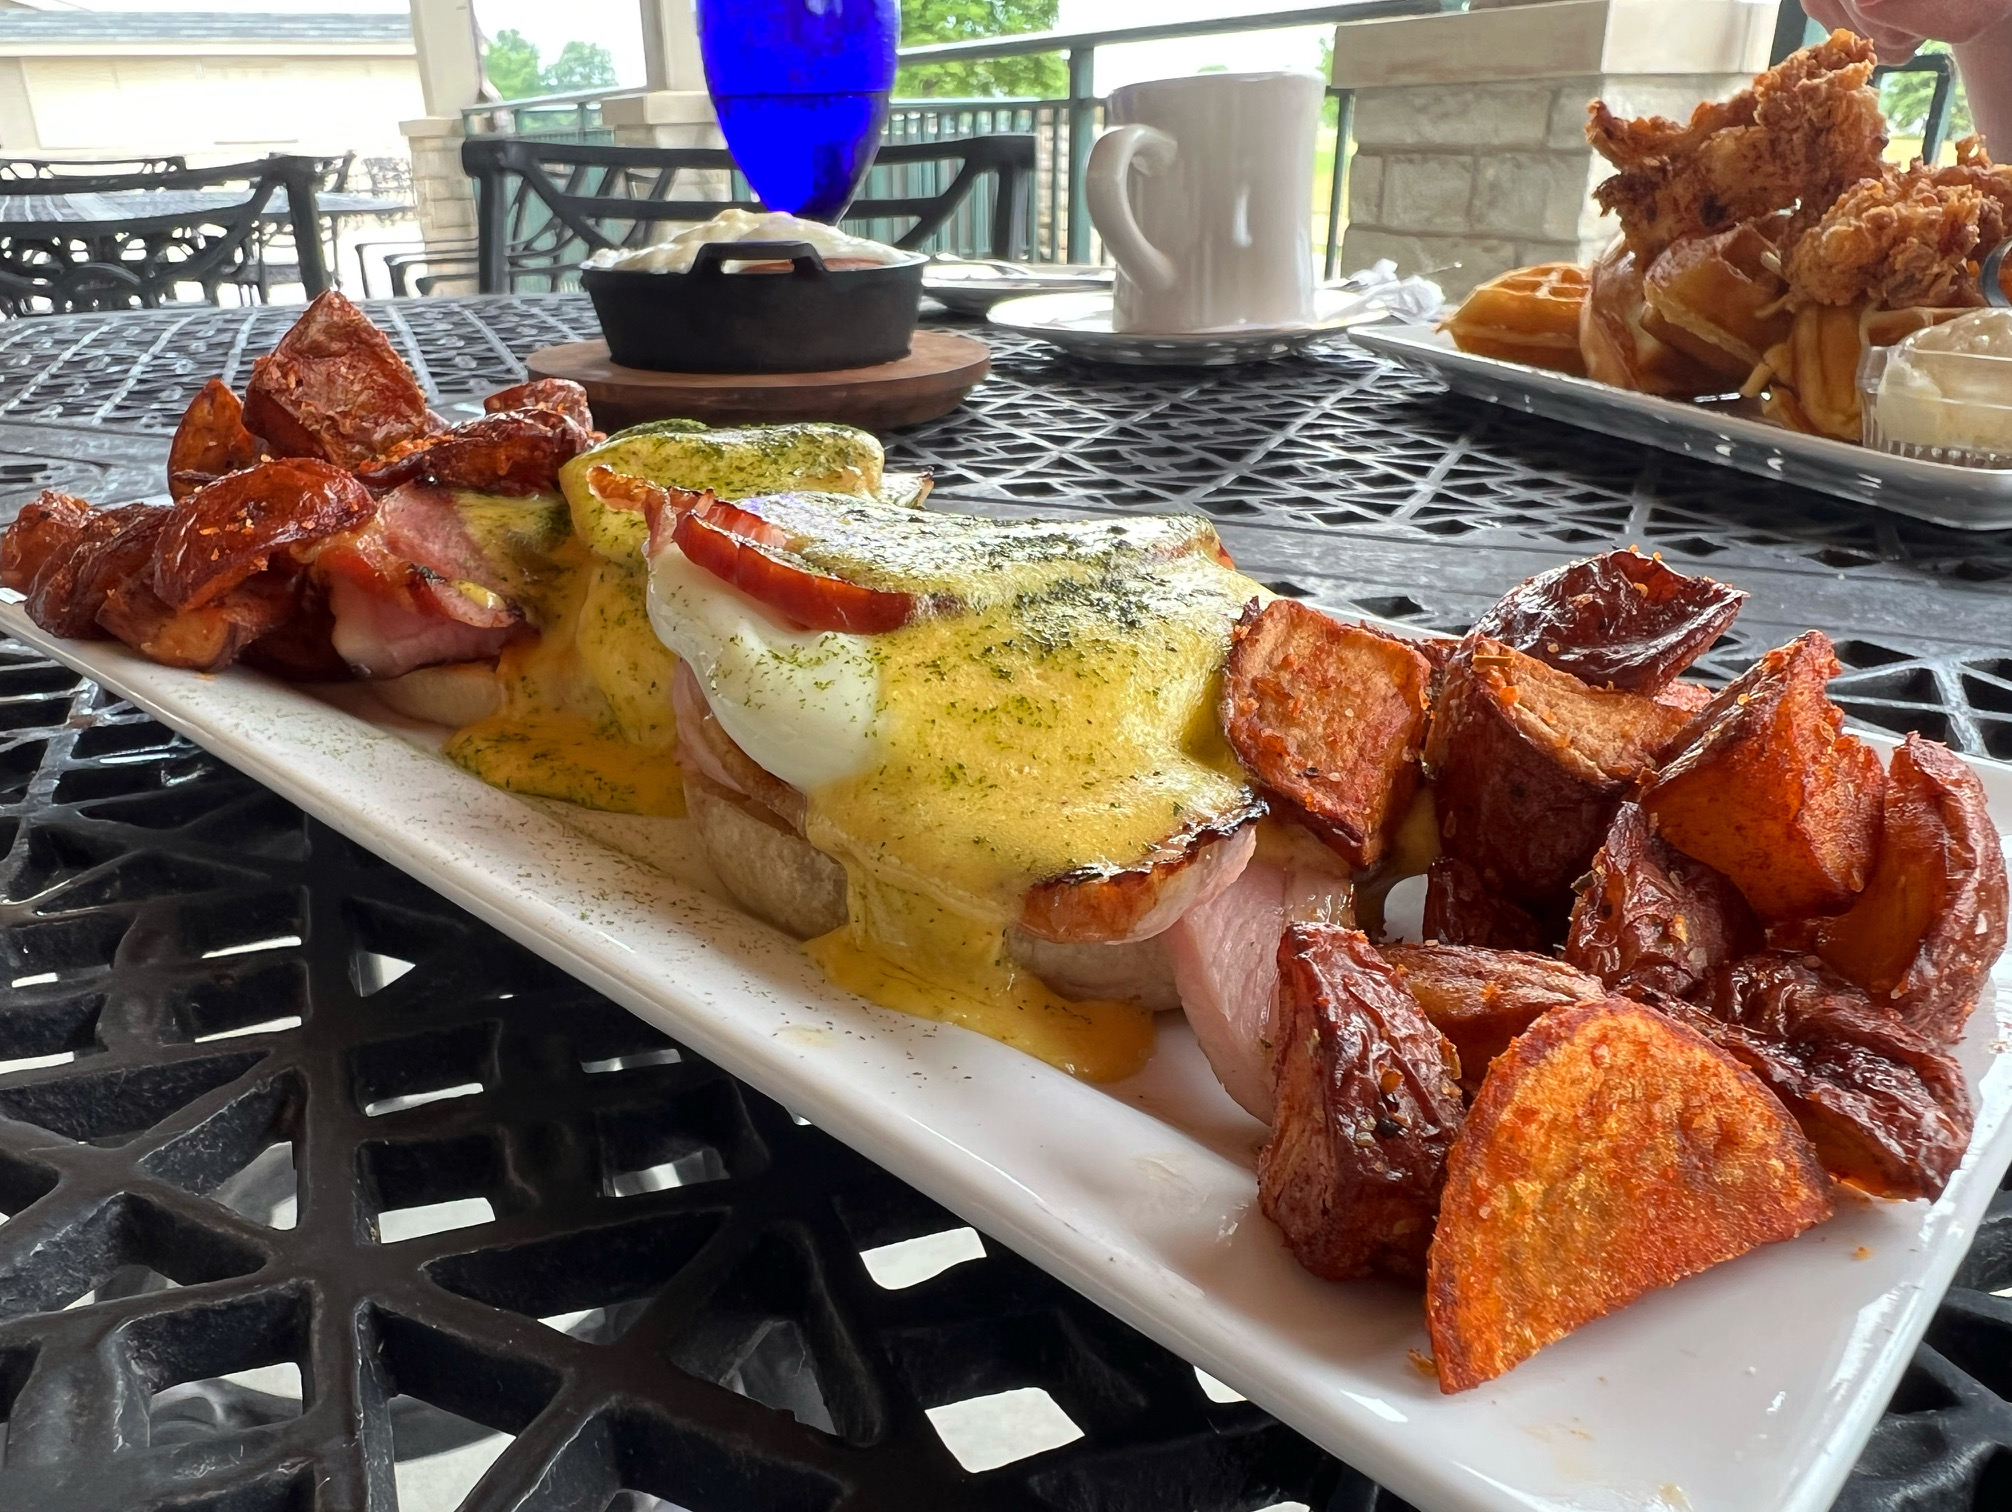 On a patio table, there is a white plate with eggs benedict and breakfast potatoes. Photo by Alyssa Buckley.